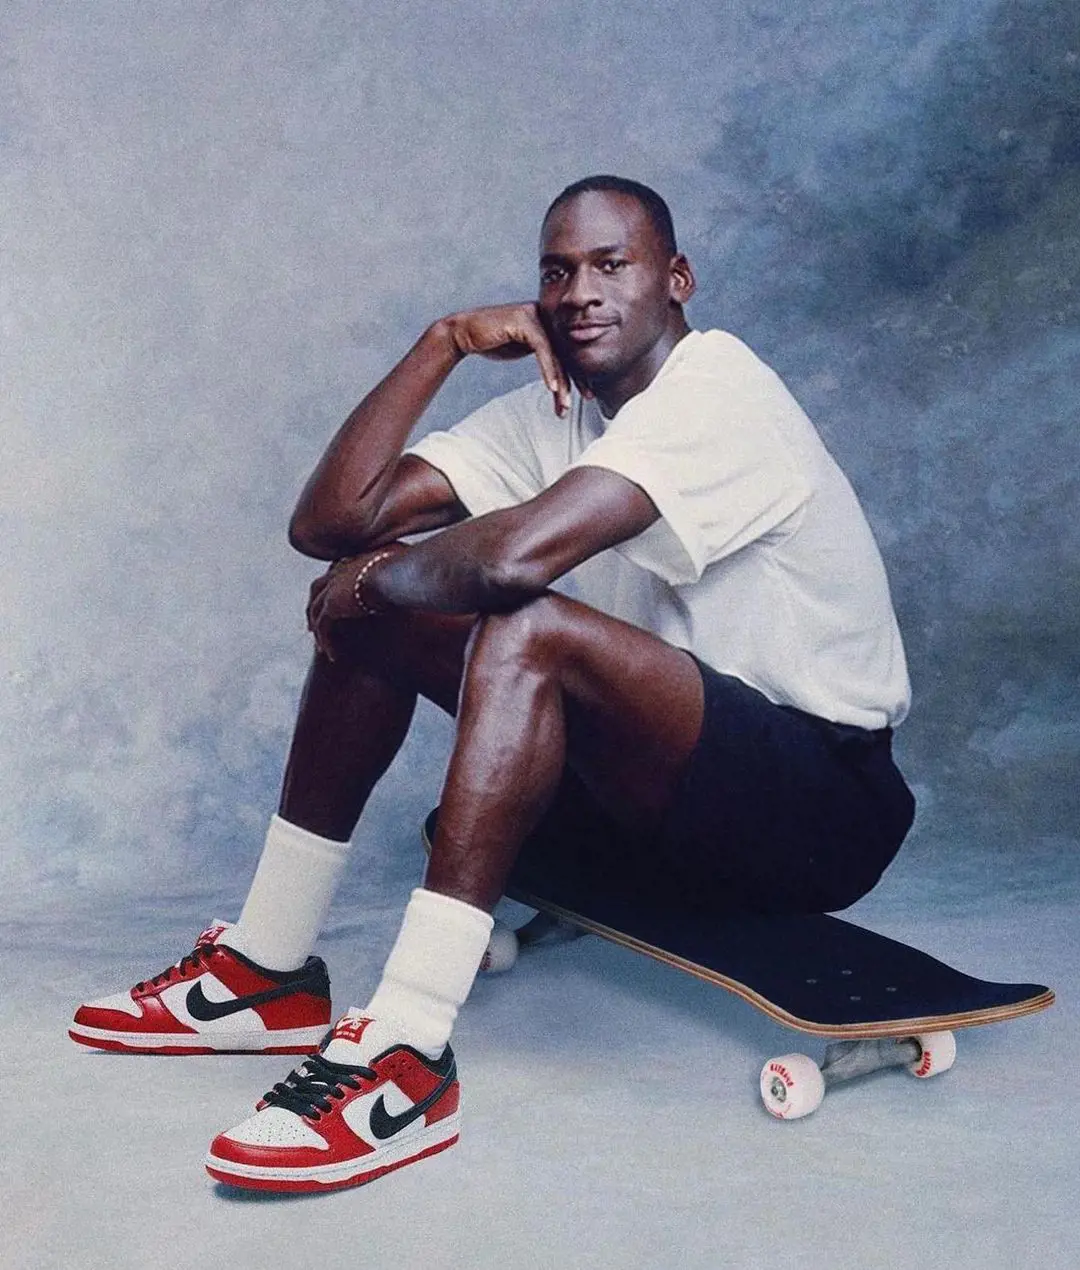 Jordan shows off his Nike sneakers while posing for a photo while sitting on a skateboard